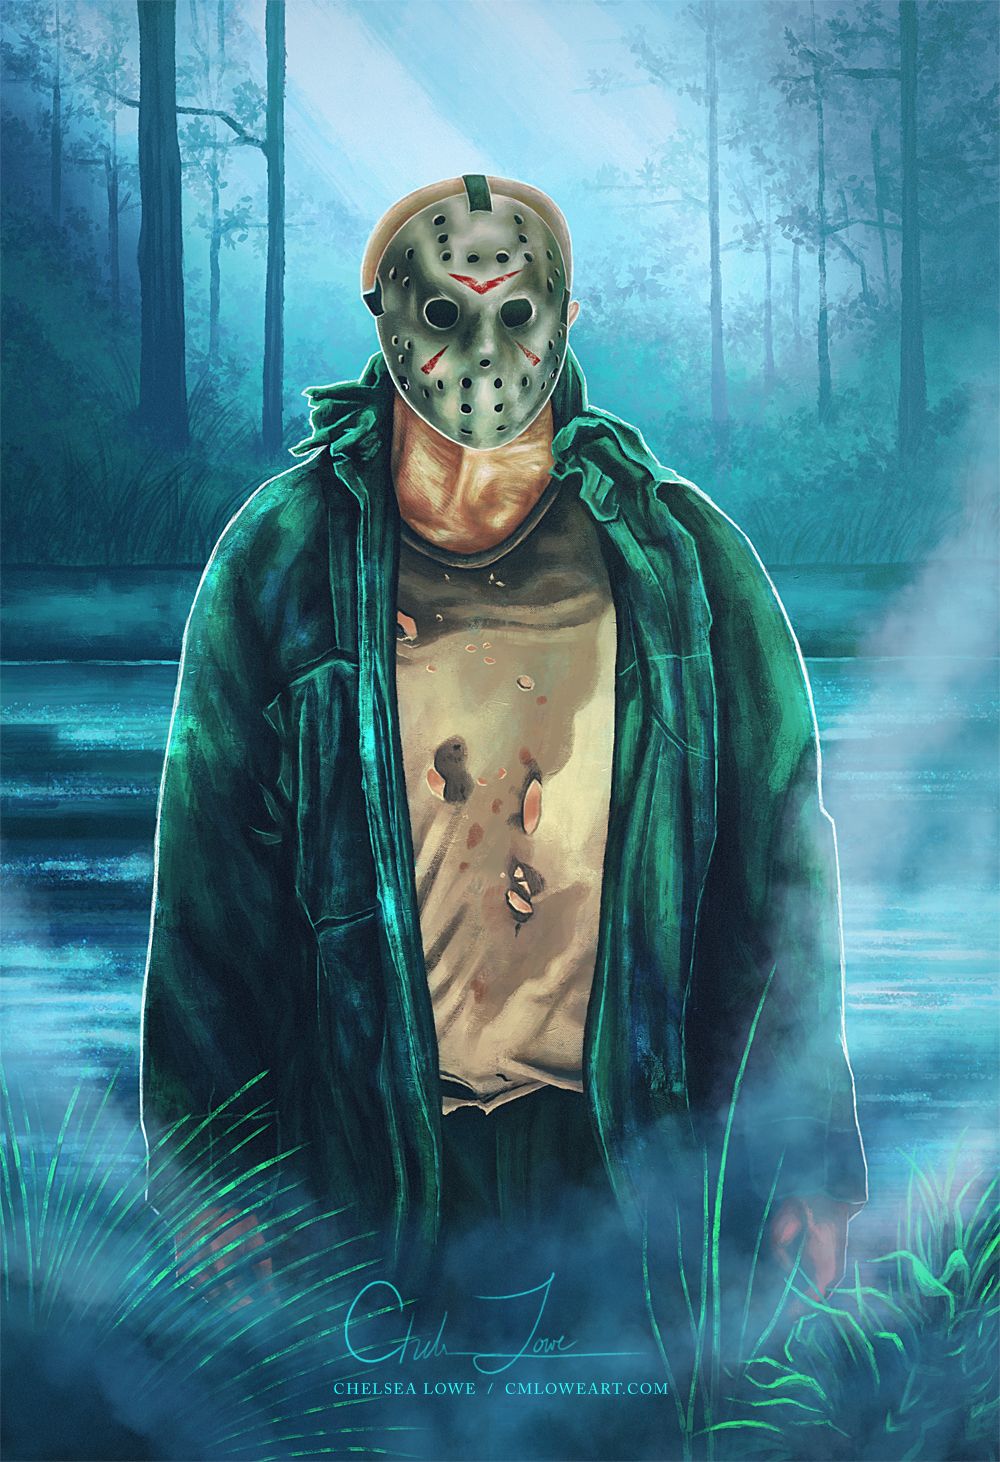 Friday The 13Th (2009) Wallpapers